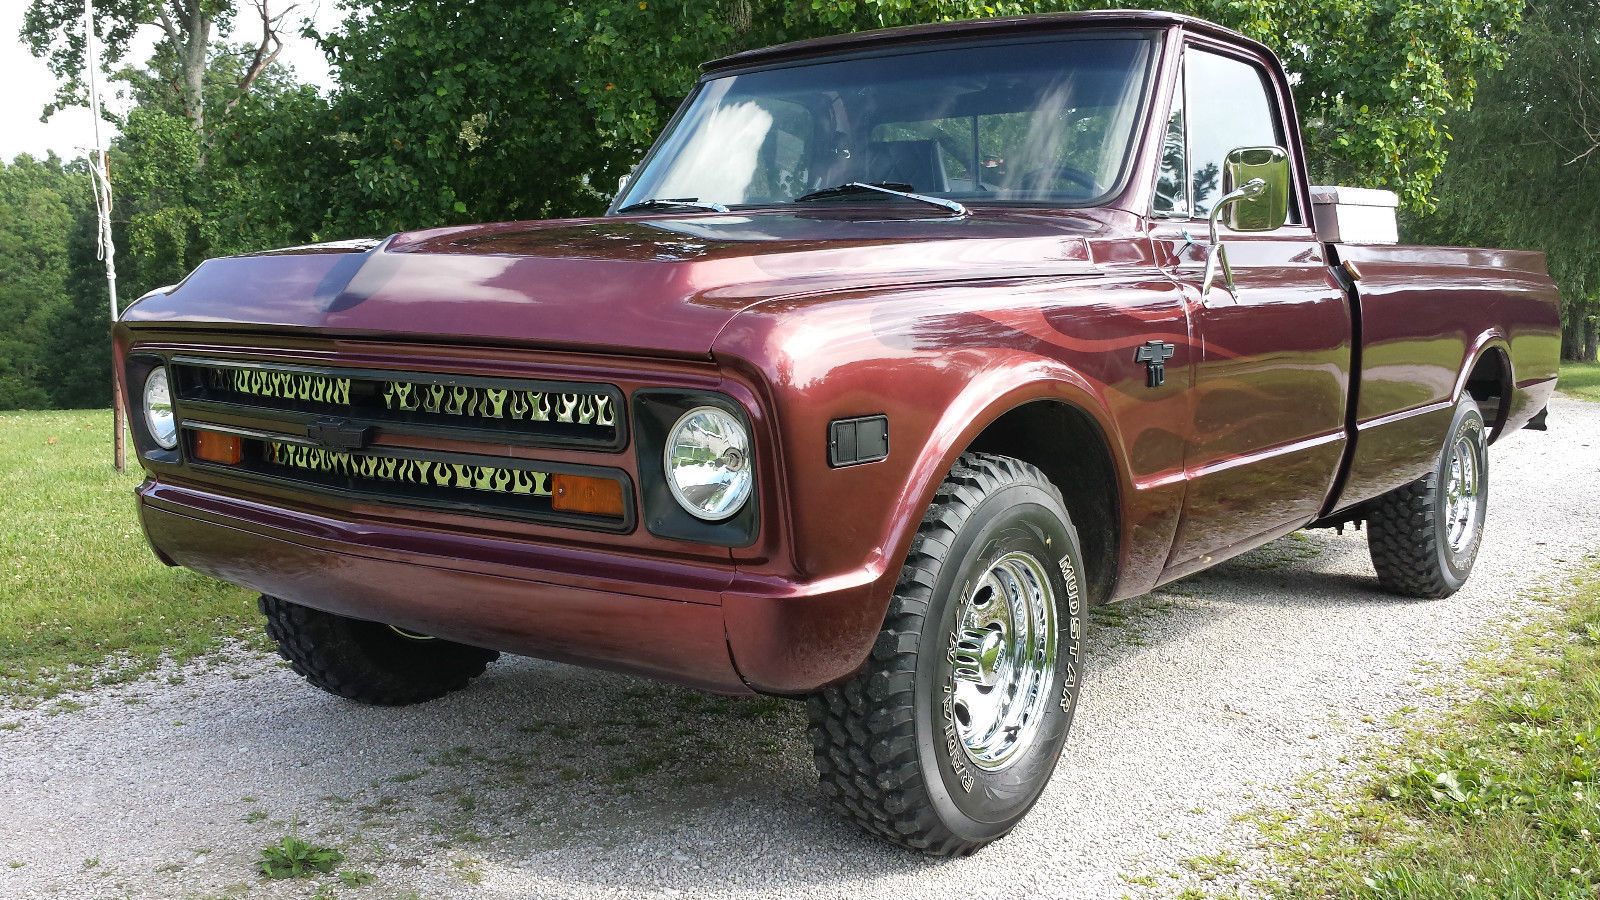 1968 Chevrolet C-10 Long Bed Pickup Truck for sale